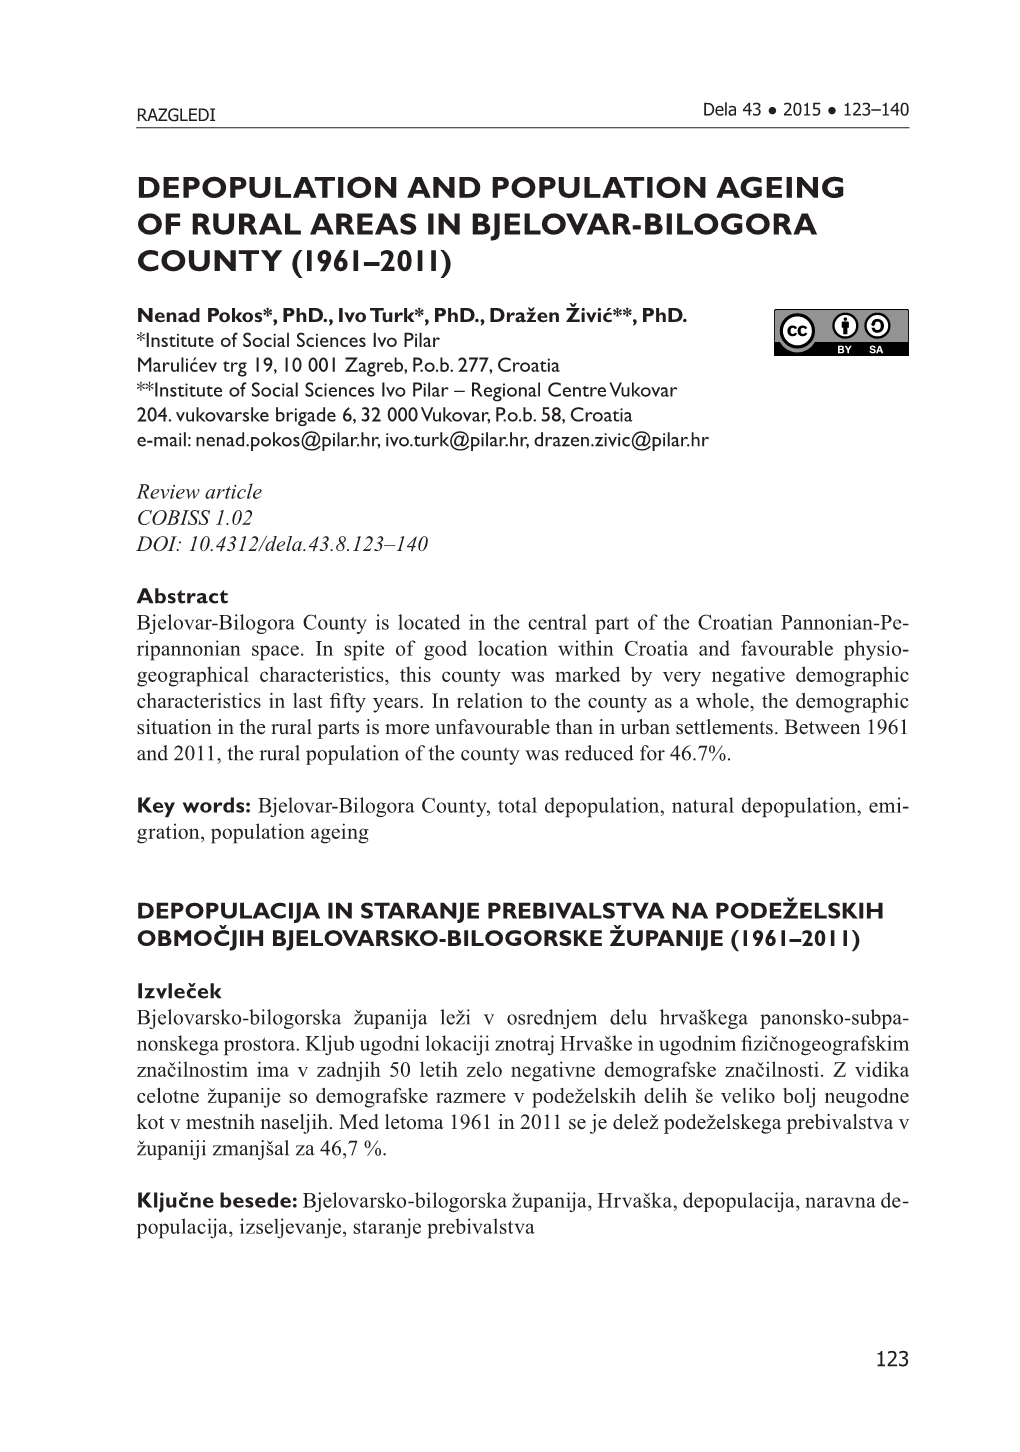 Depopulation and Population Ageing of Rural Areas in Bjelovar-Bilogora County (1961–2011)